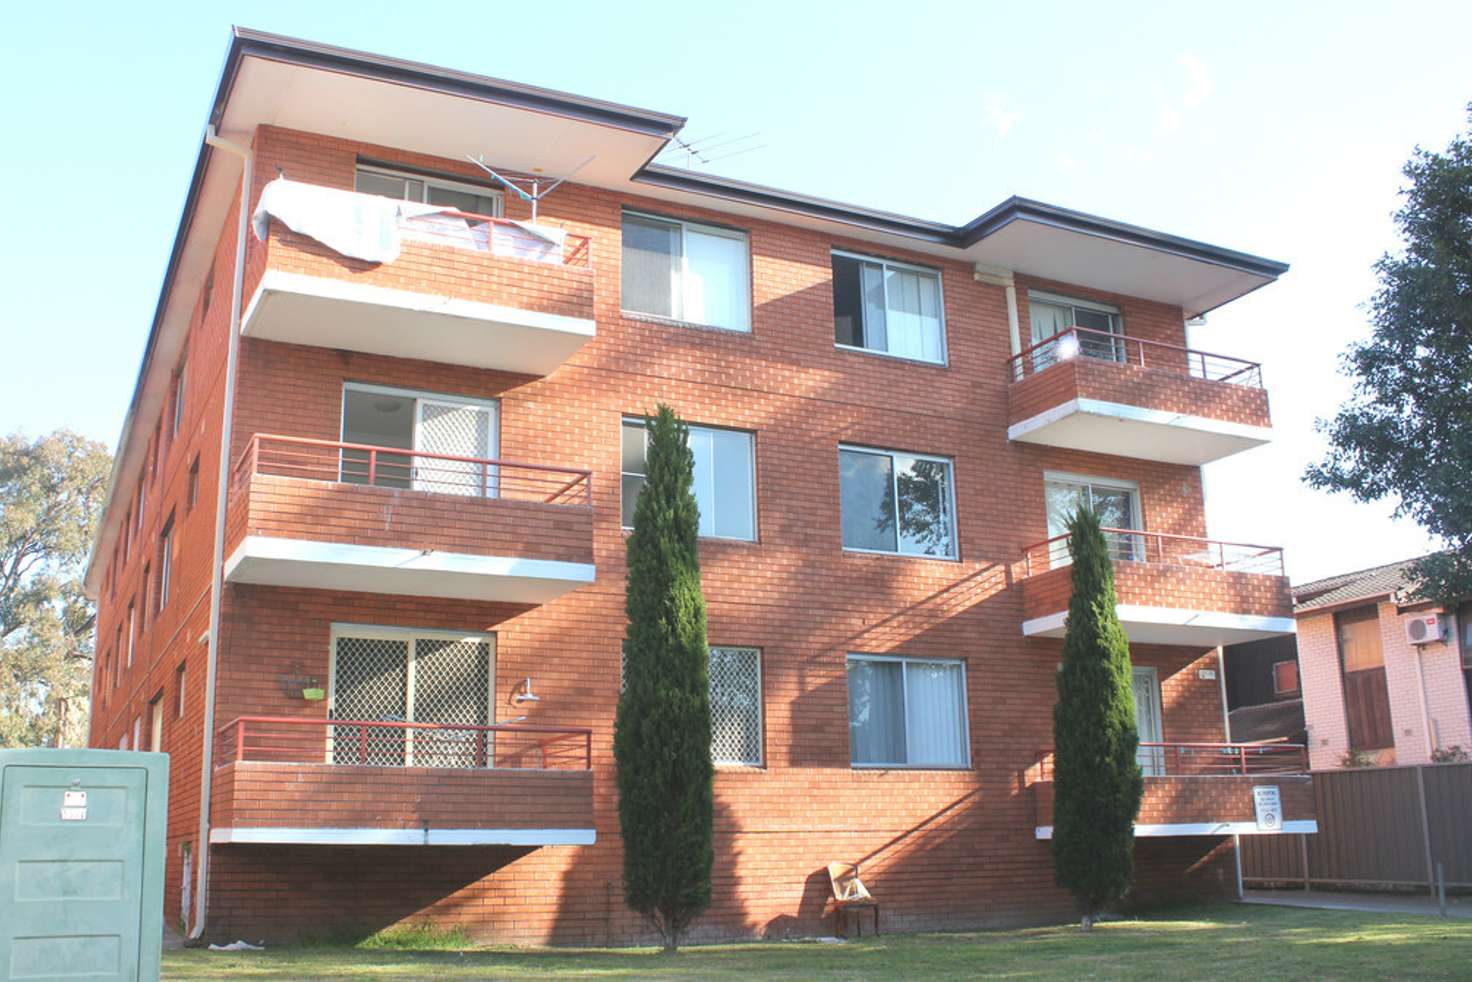 Main view of Homely unit listing, 14/156 JOHN ST, Cabramatta NSW 2166